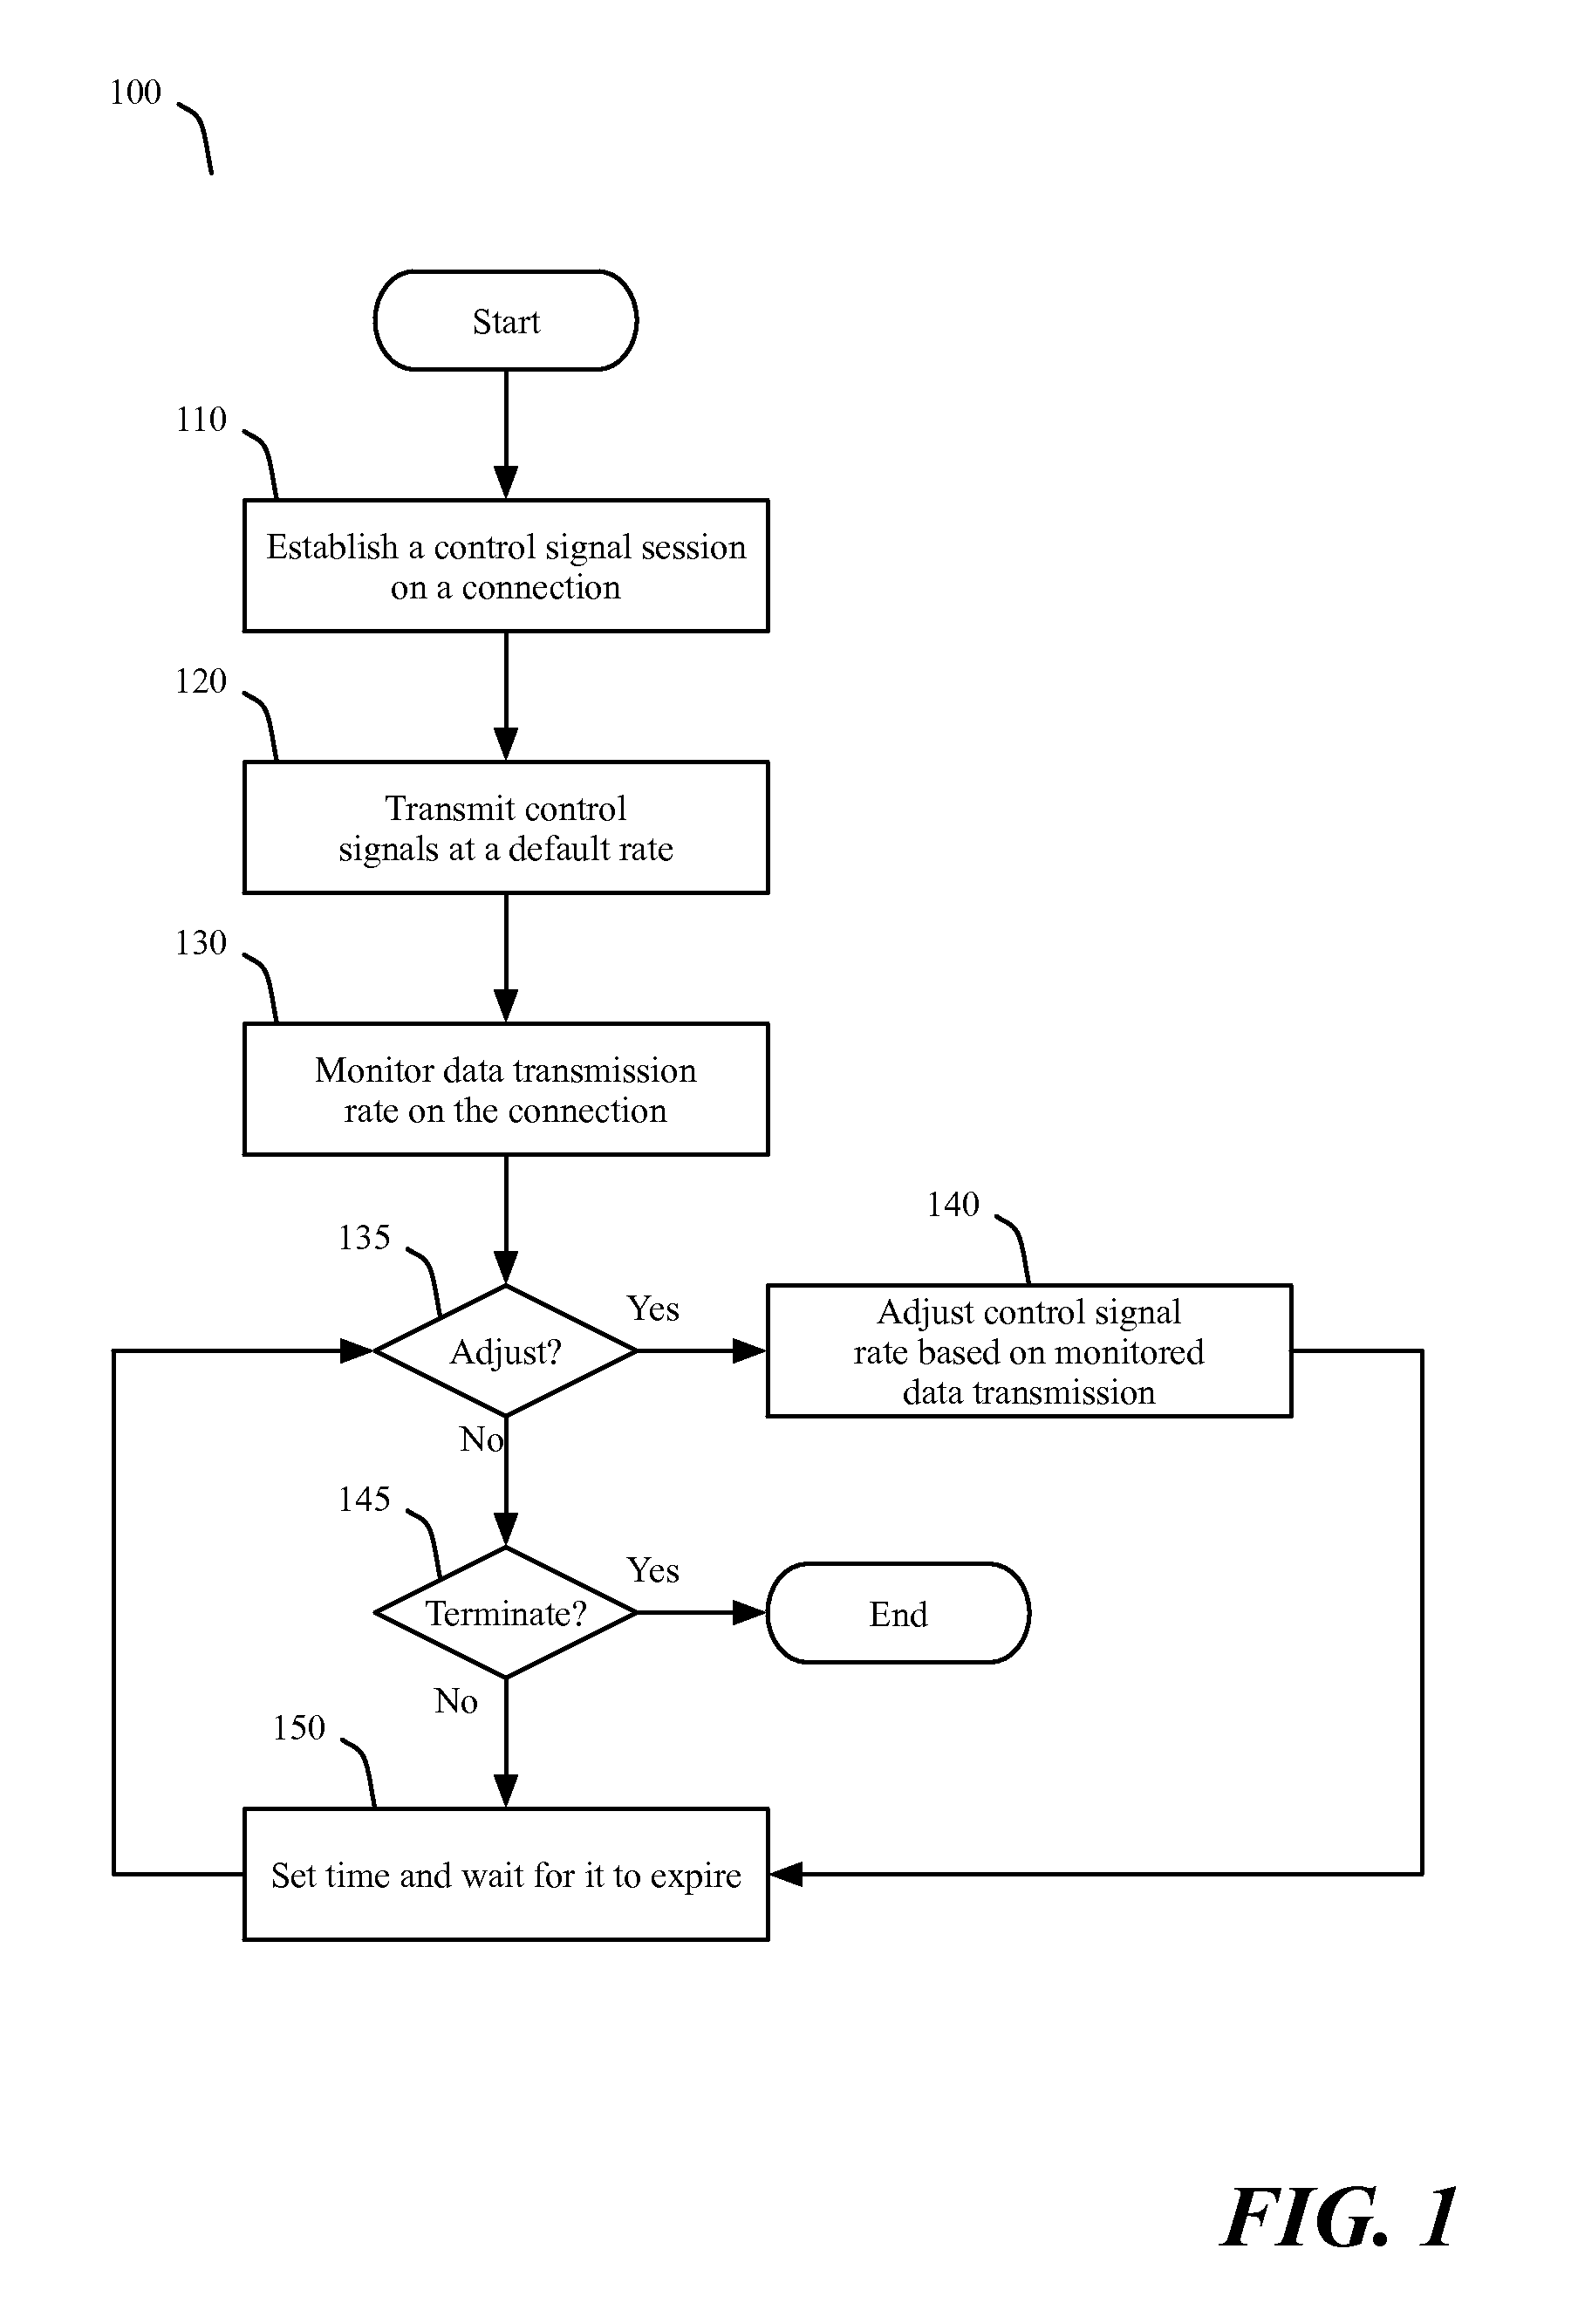 Adjusting connection validating control signals in response to changes in network traffic